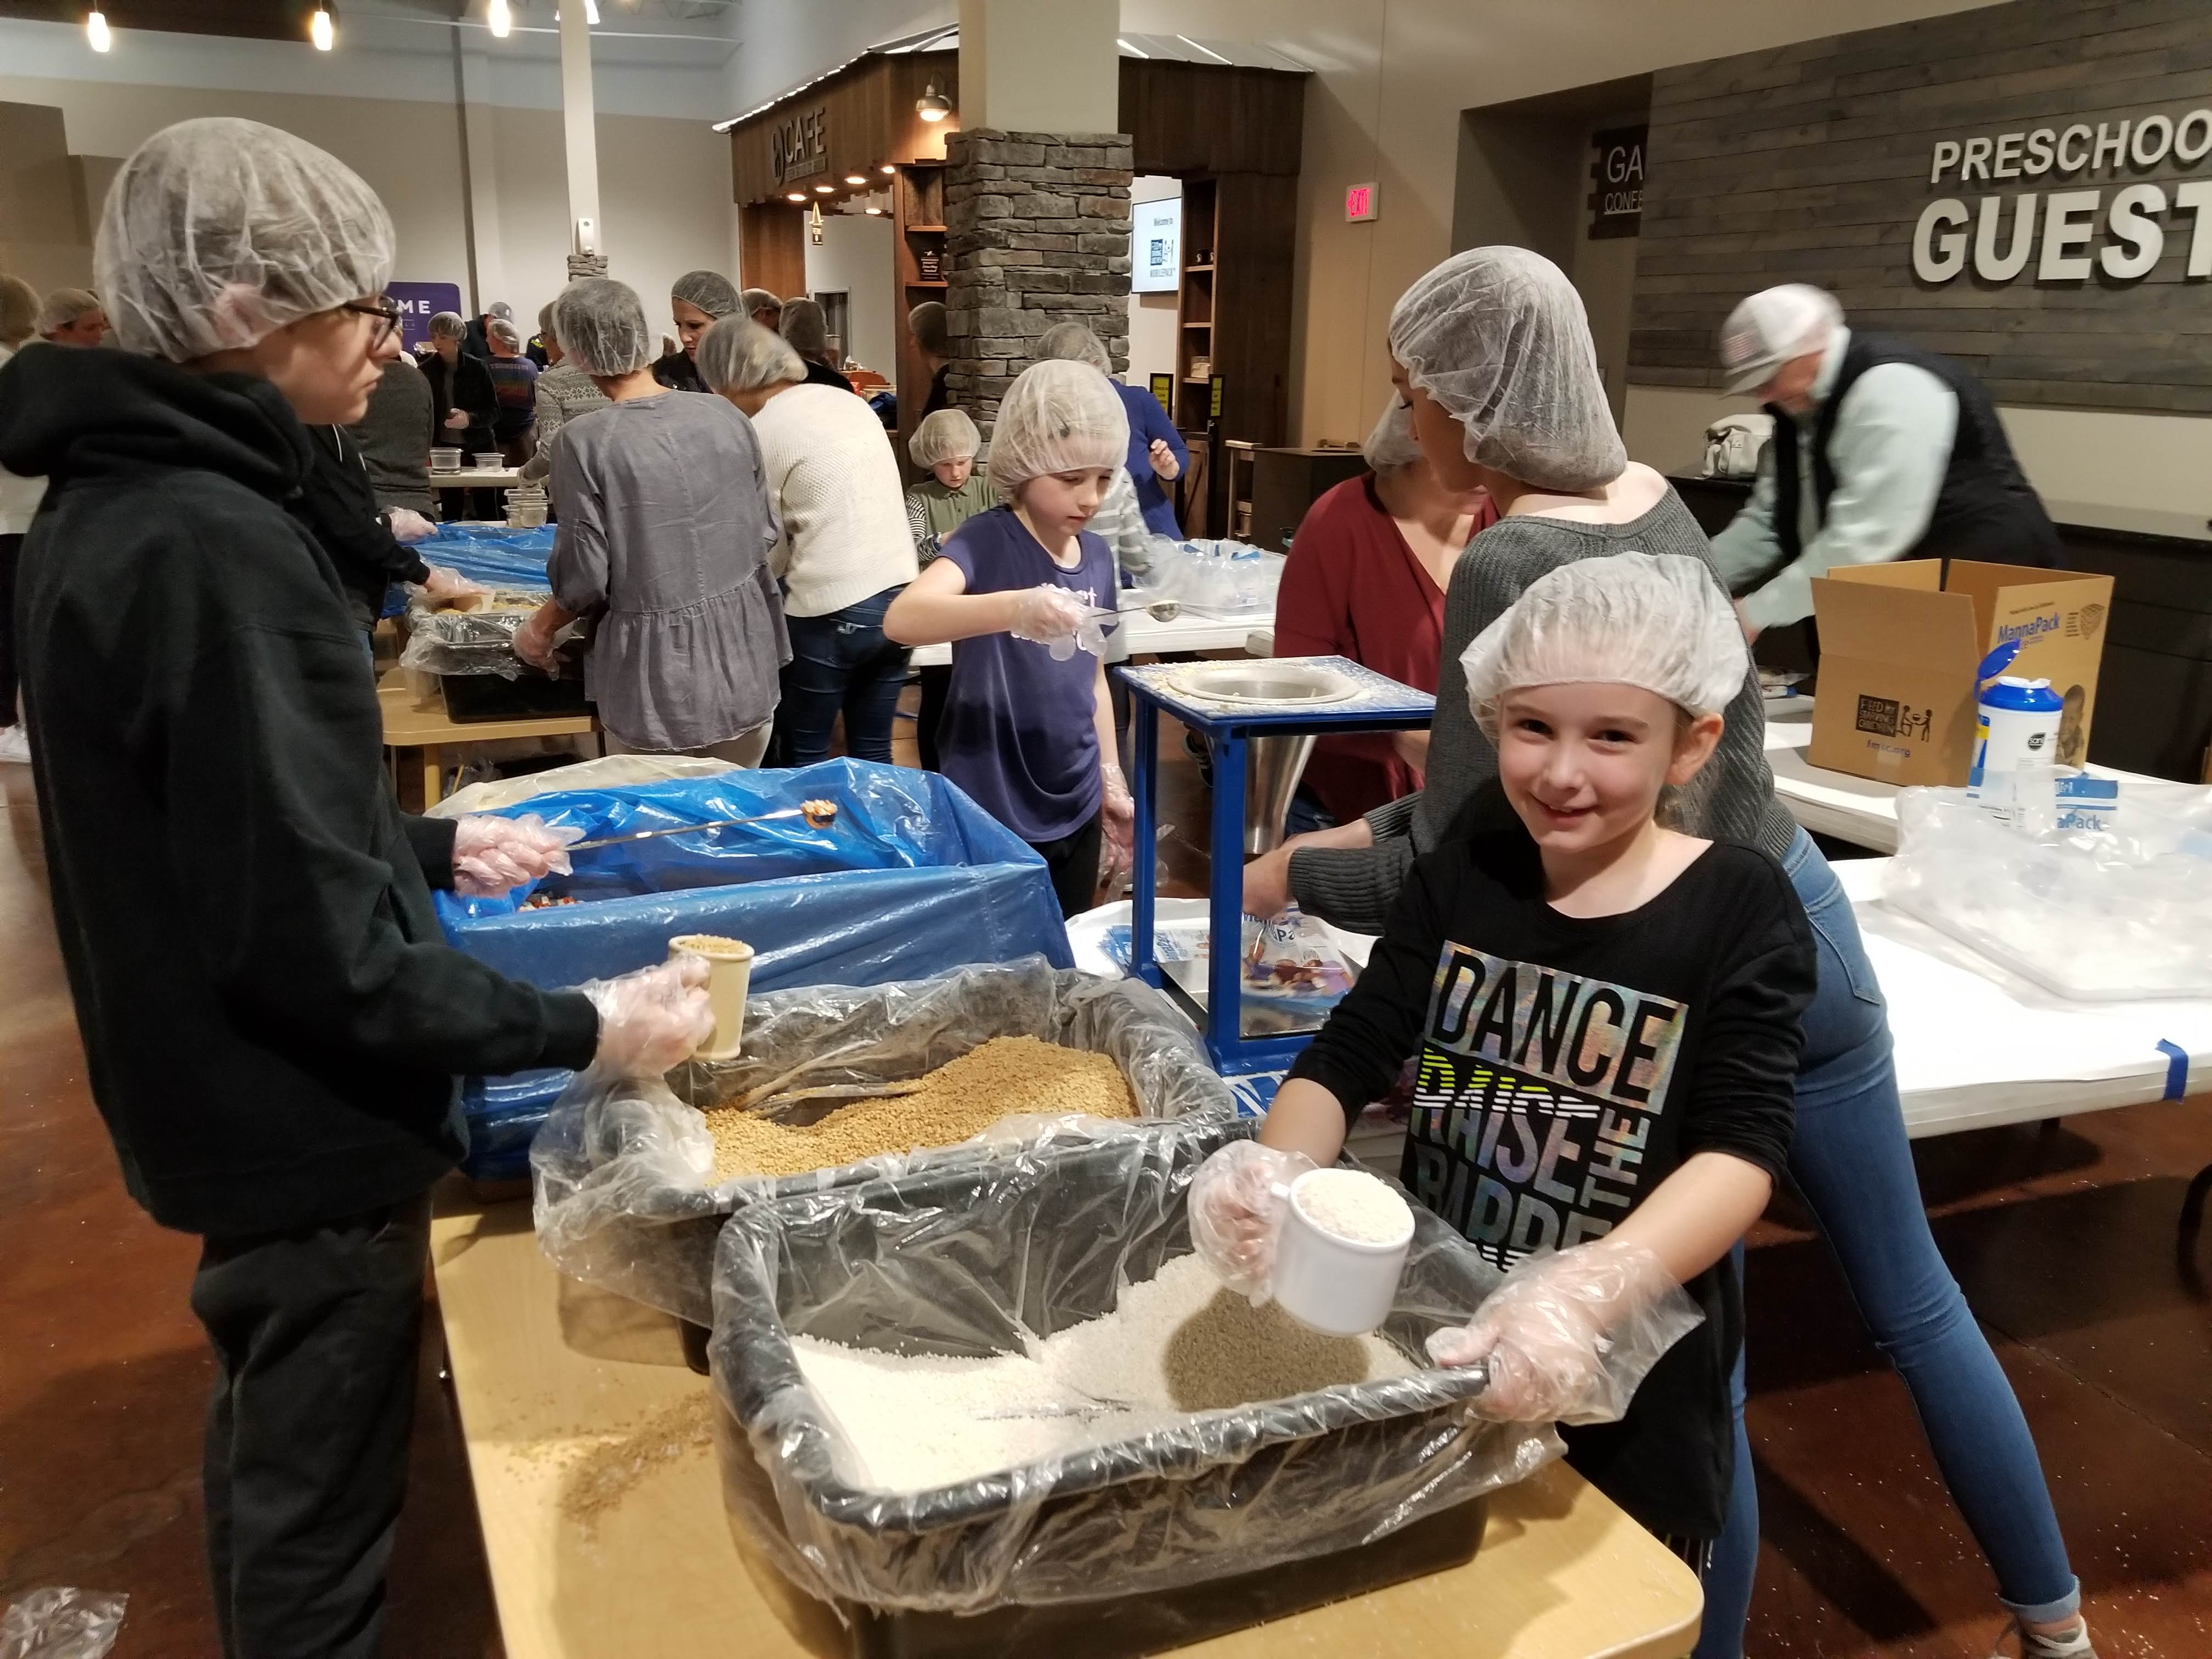 Packing food for starving children